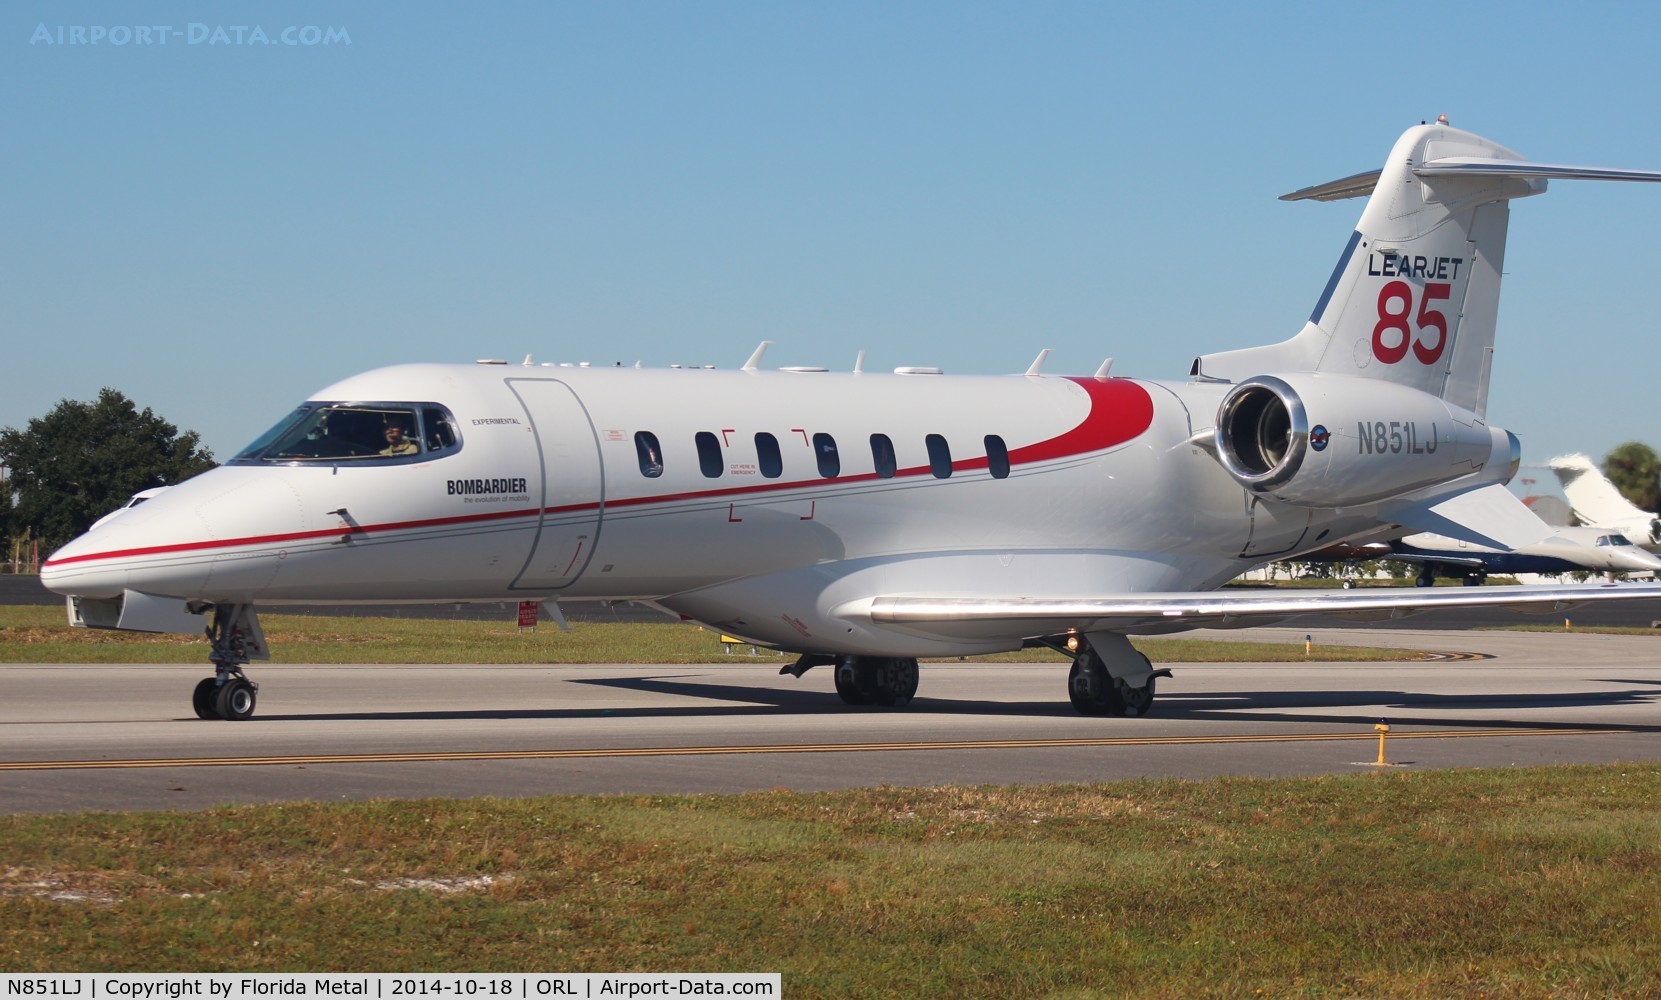 N851LJ, 2014 Bombardier Learjet 85 C/N 8001, Lear 85, the only one built with project canceled.